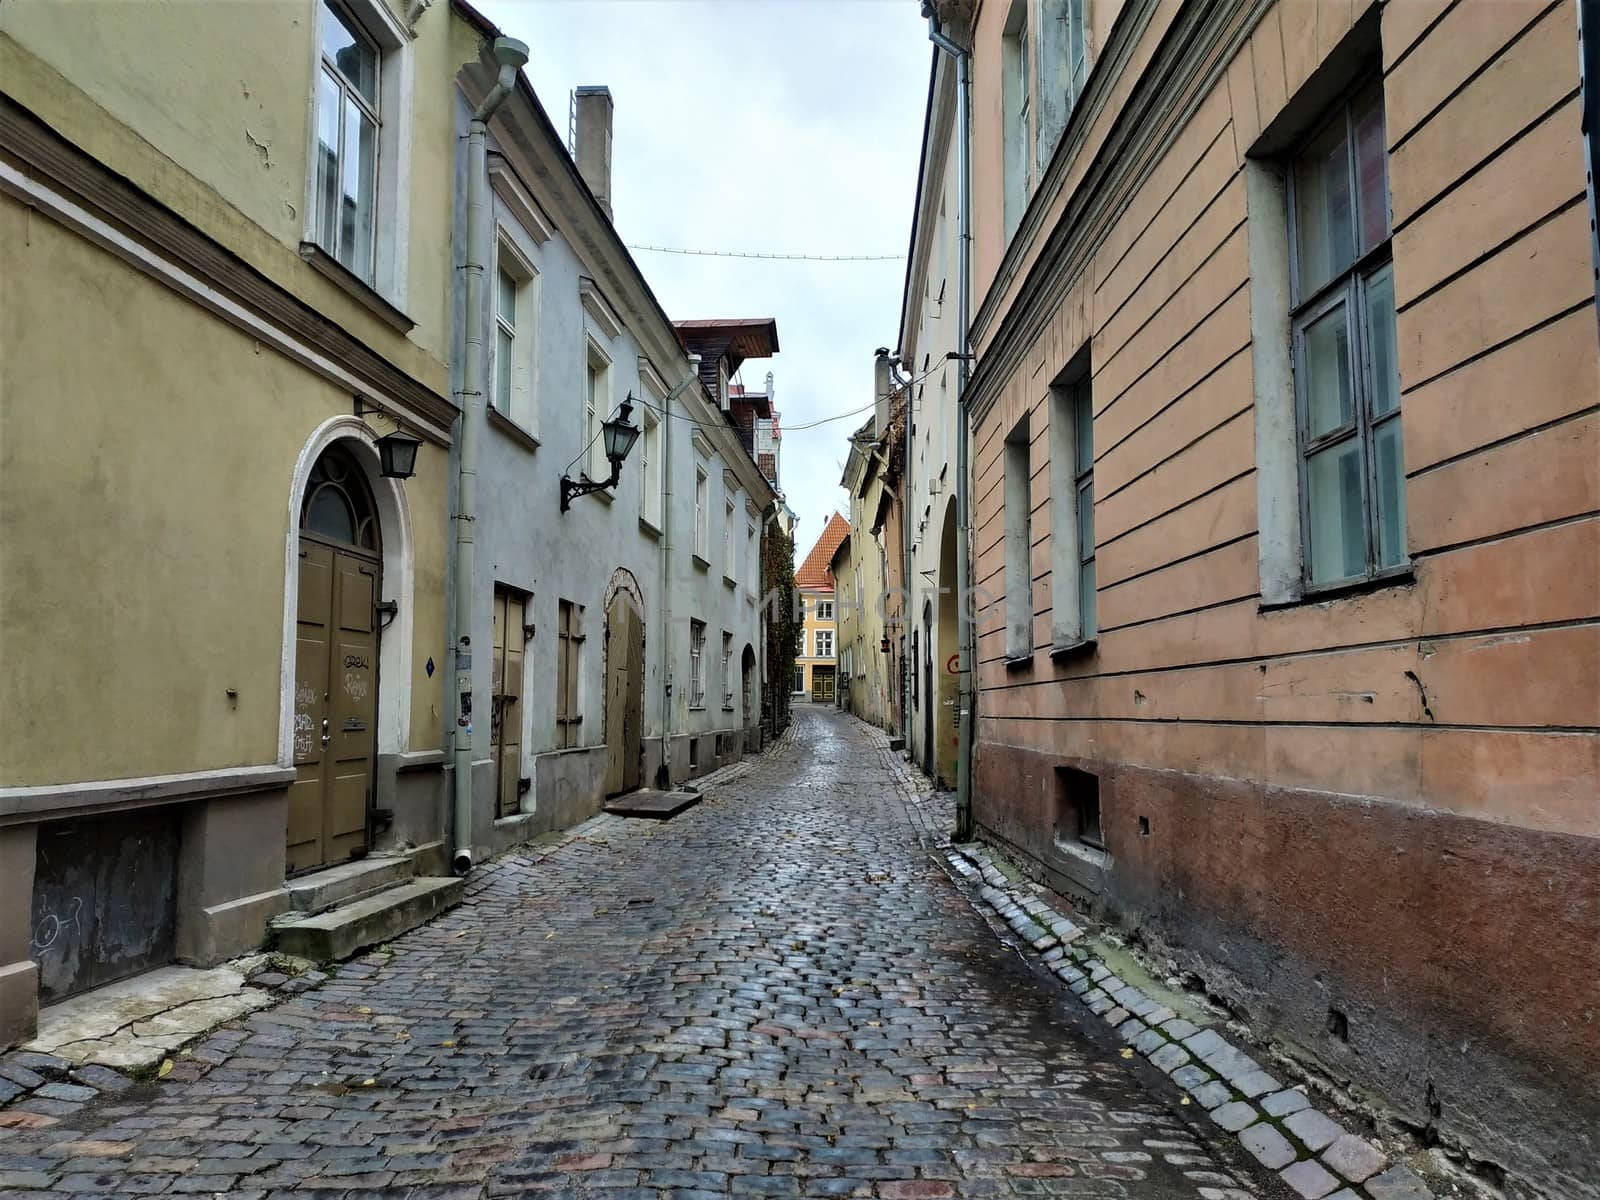 Colourful houses in narrow street of old town Tallinn by pisces2386